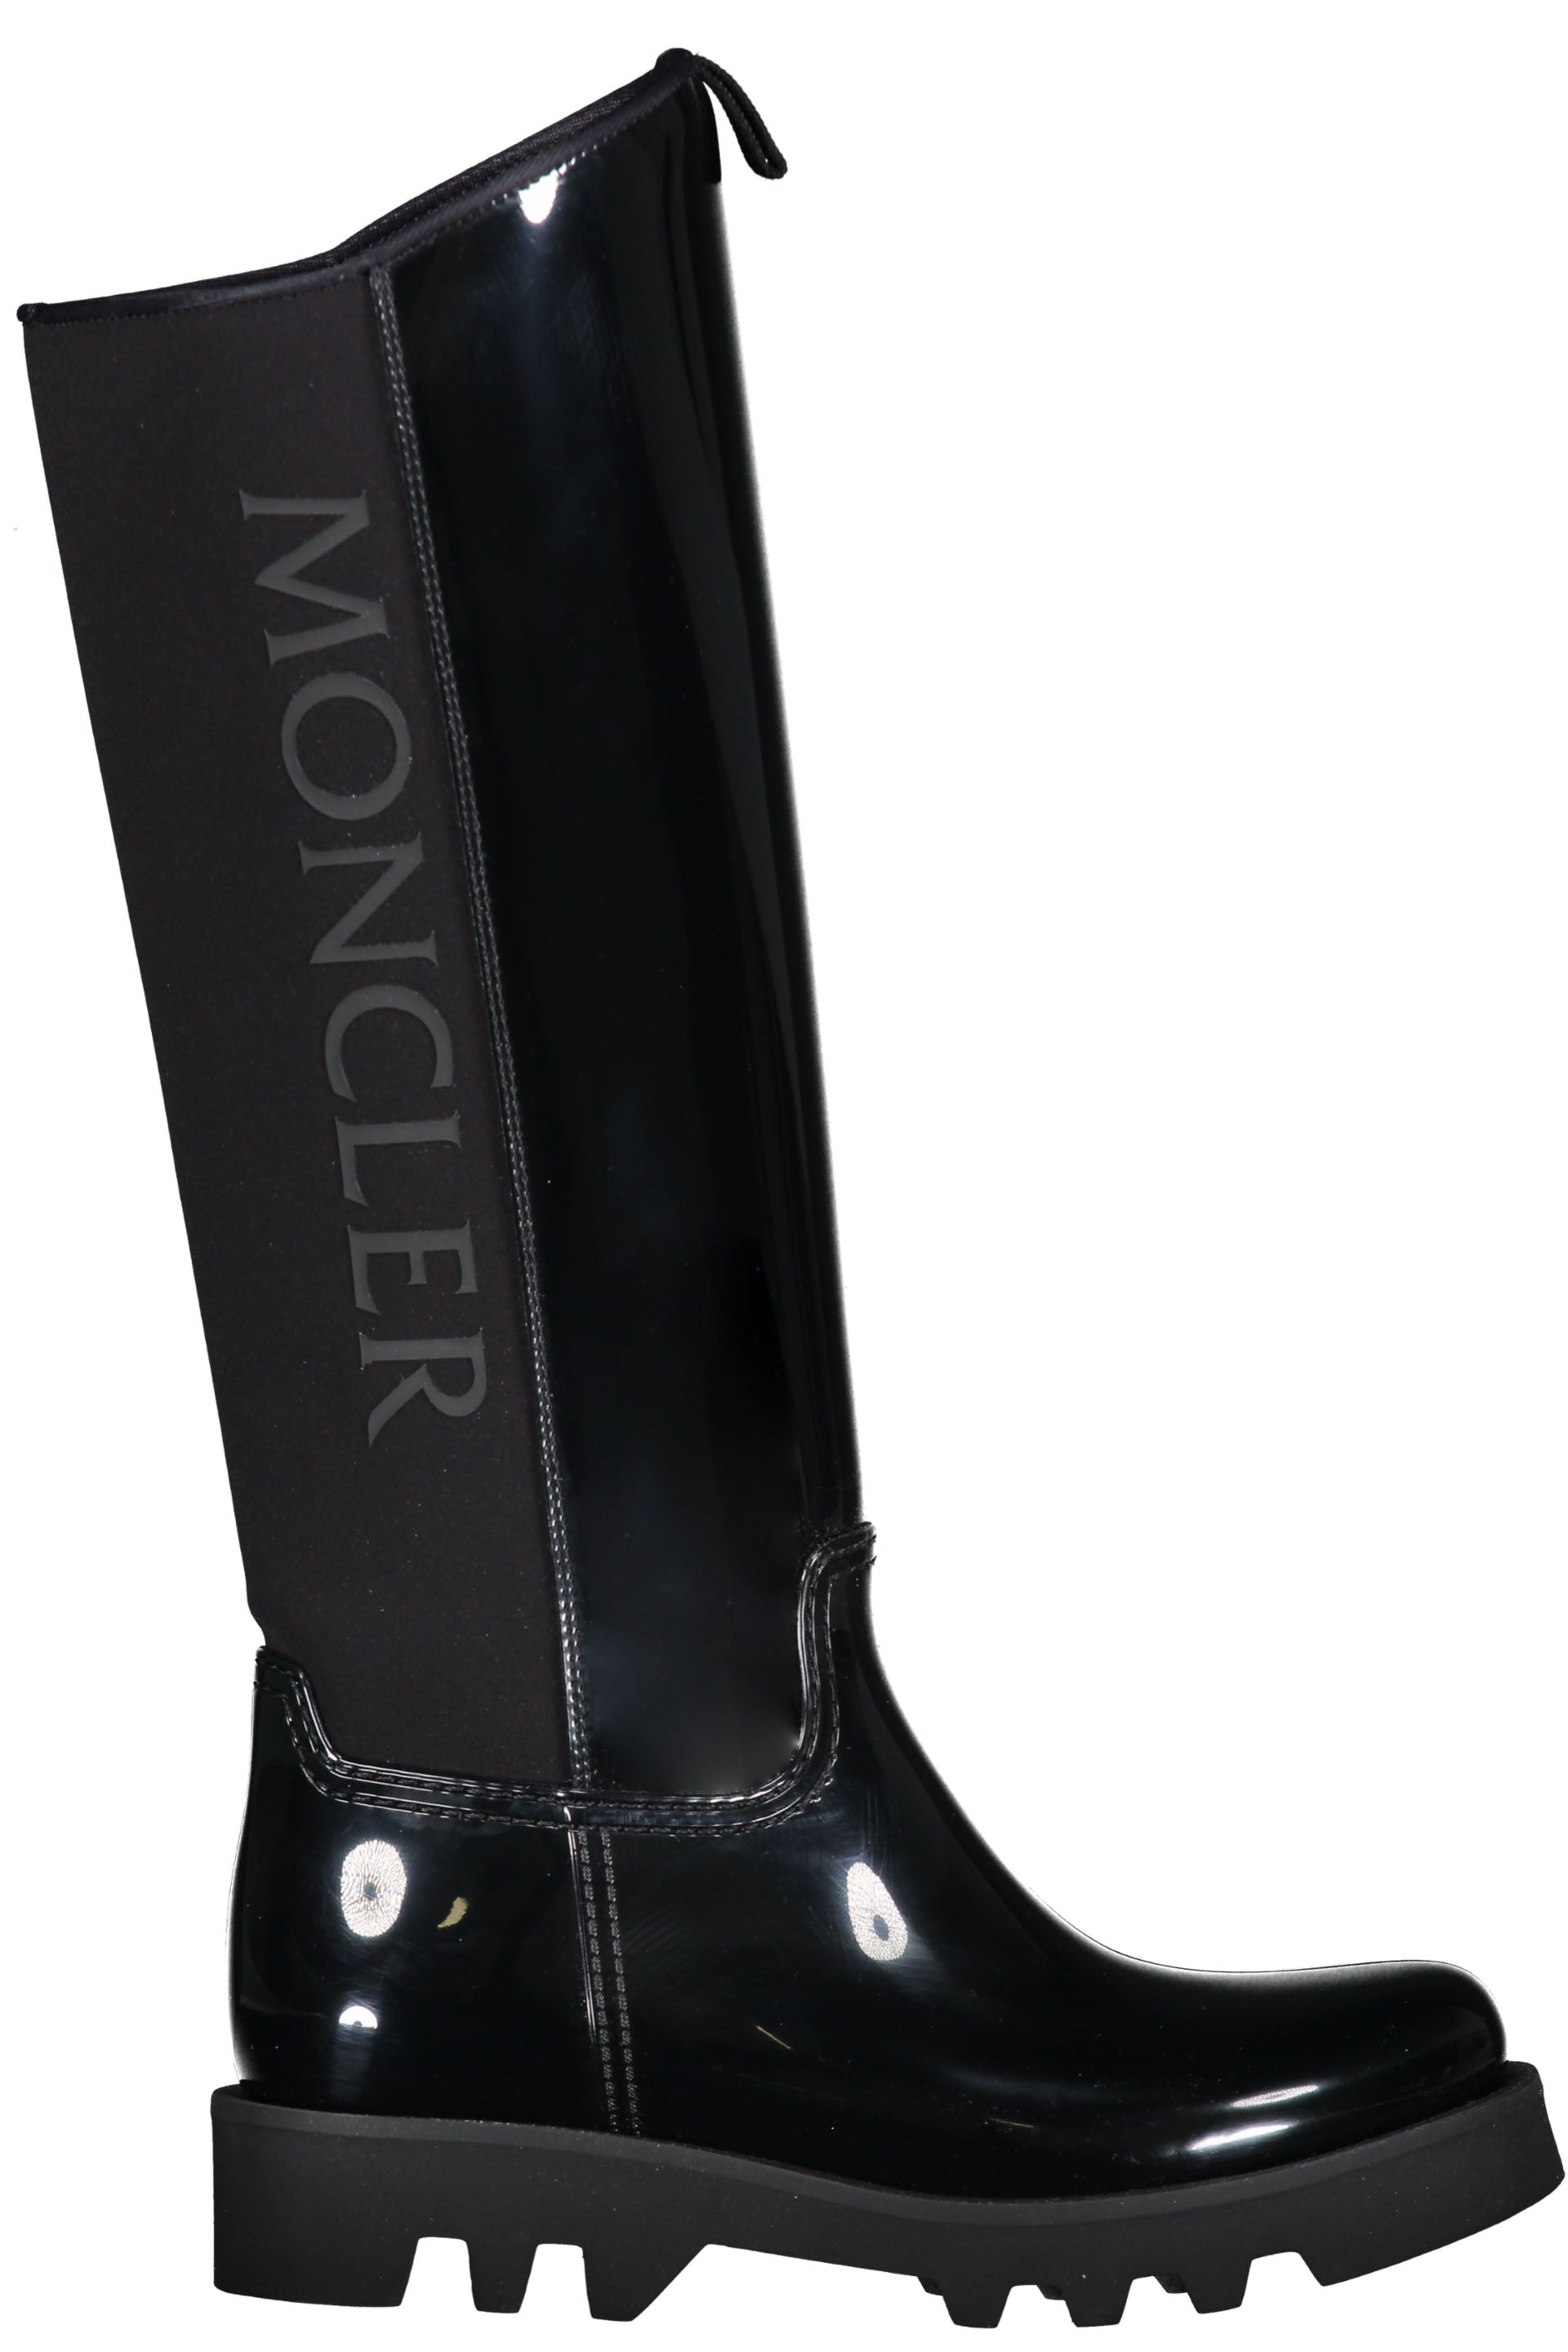 Moncler-OUTLET-SALE-Gilla-knee-boots-Stiefel-Stiefeletten-36-ARCHIVE-COLLECTION-2.jpg